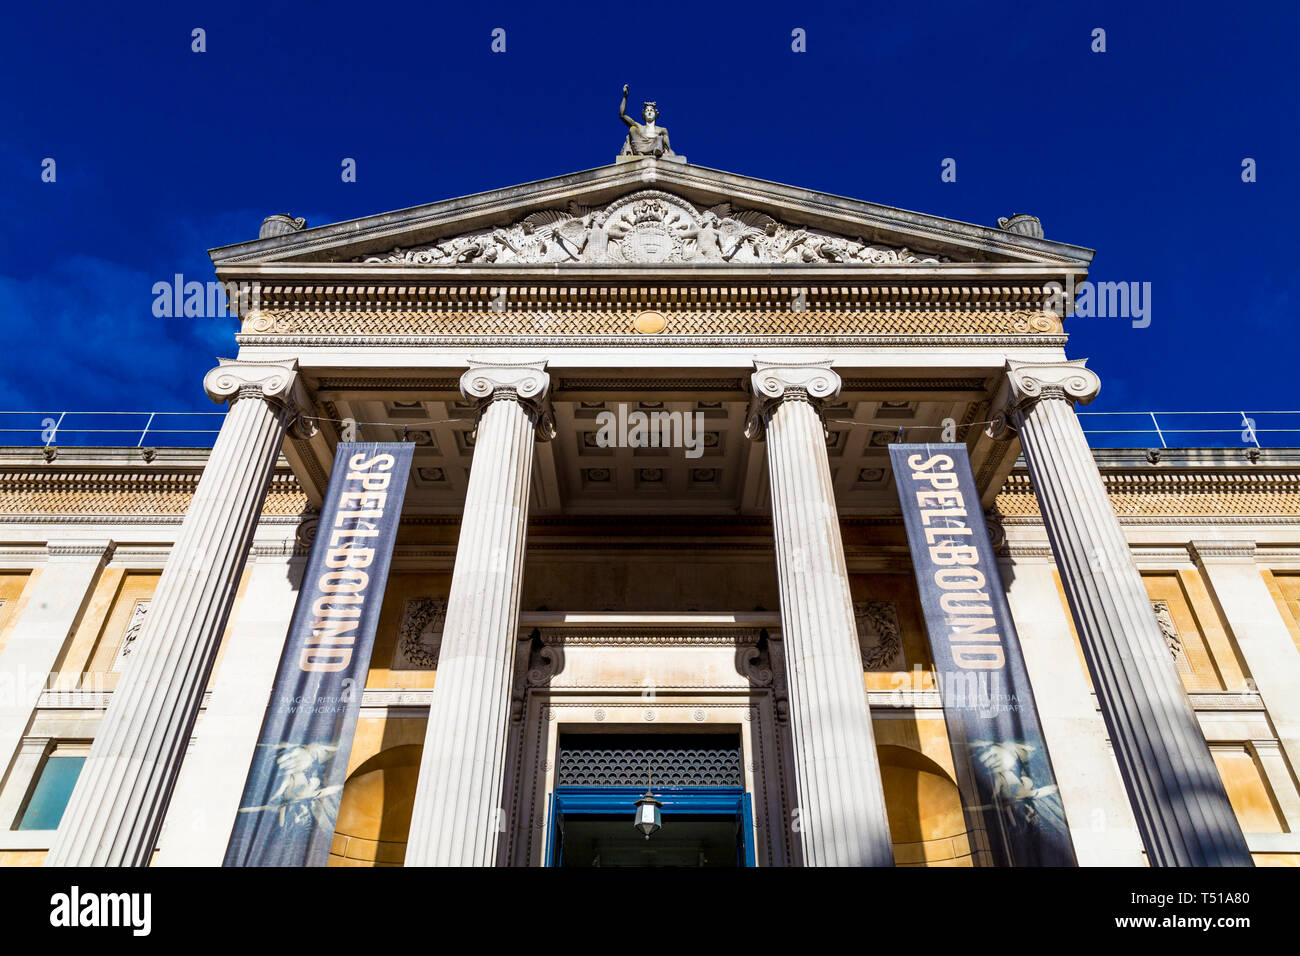 Classical style facade of the Ashmolean Museum of Art and Archaeology (Spellbound exhibition) in Oxford, UK Stock Photo